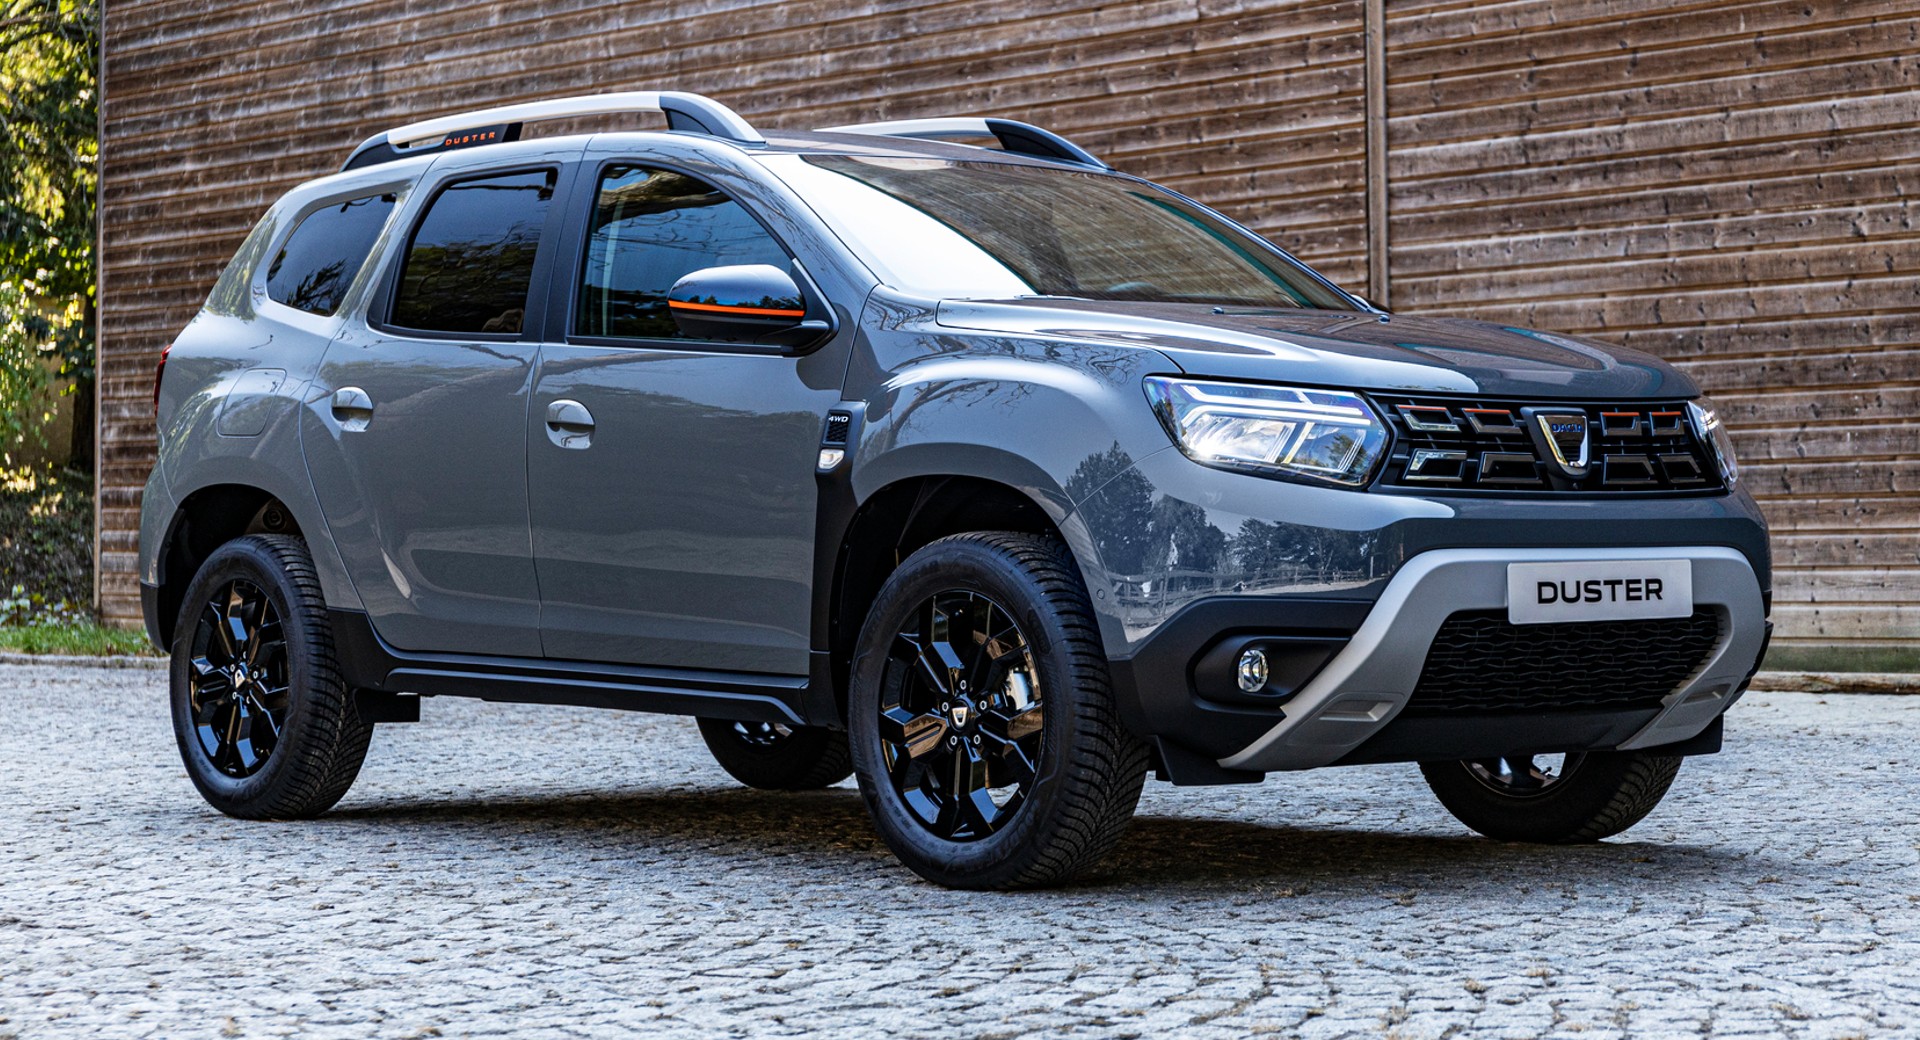 Indirecto instructor Concurso New Duster Extreme SE Is The Most Expensive Dacia Ever Priced Up To £21,645  ($29.3k) | Carscoops